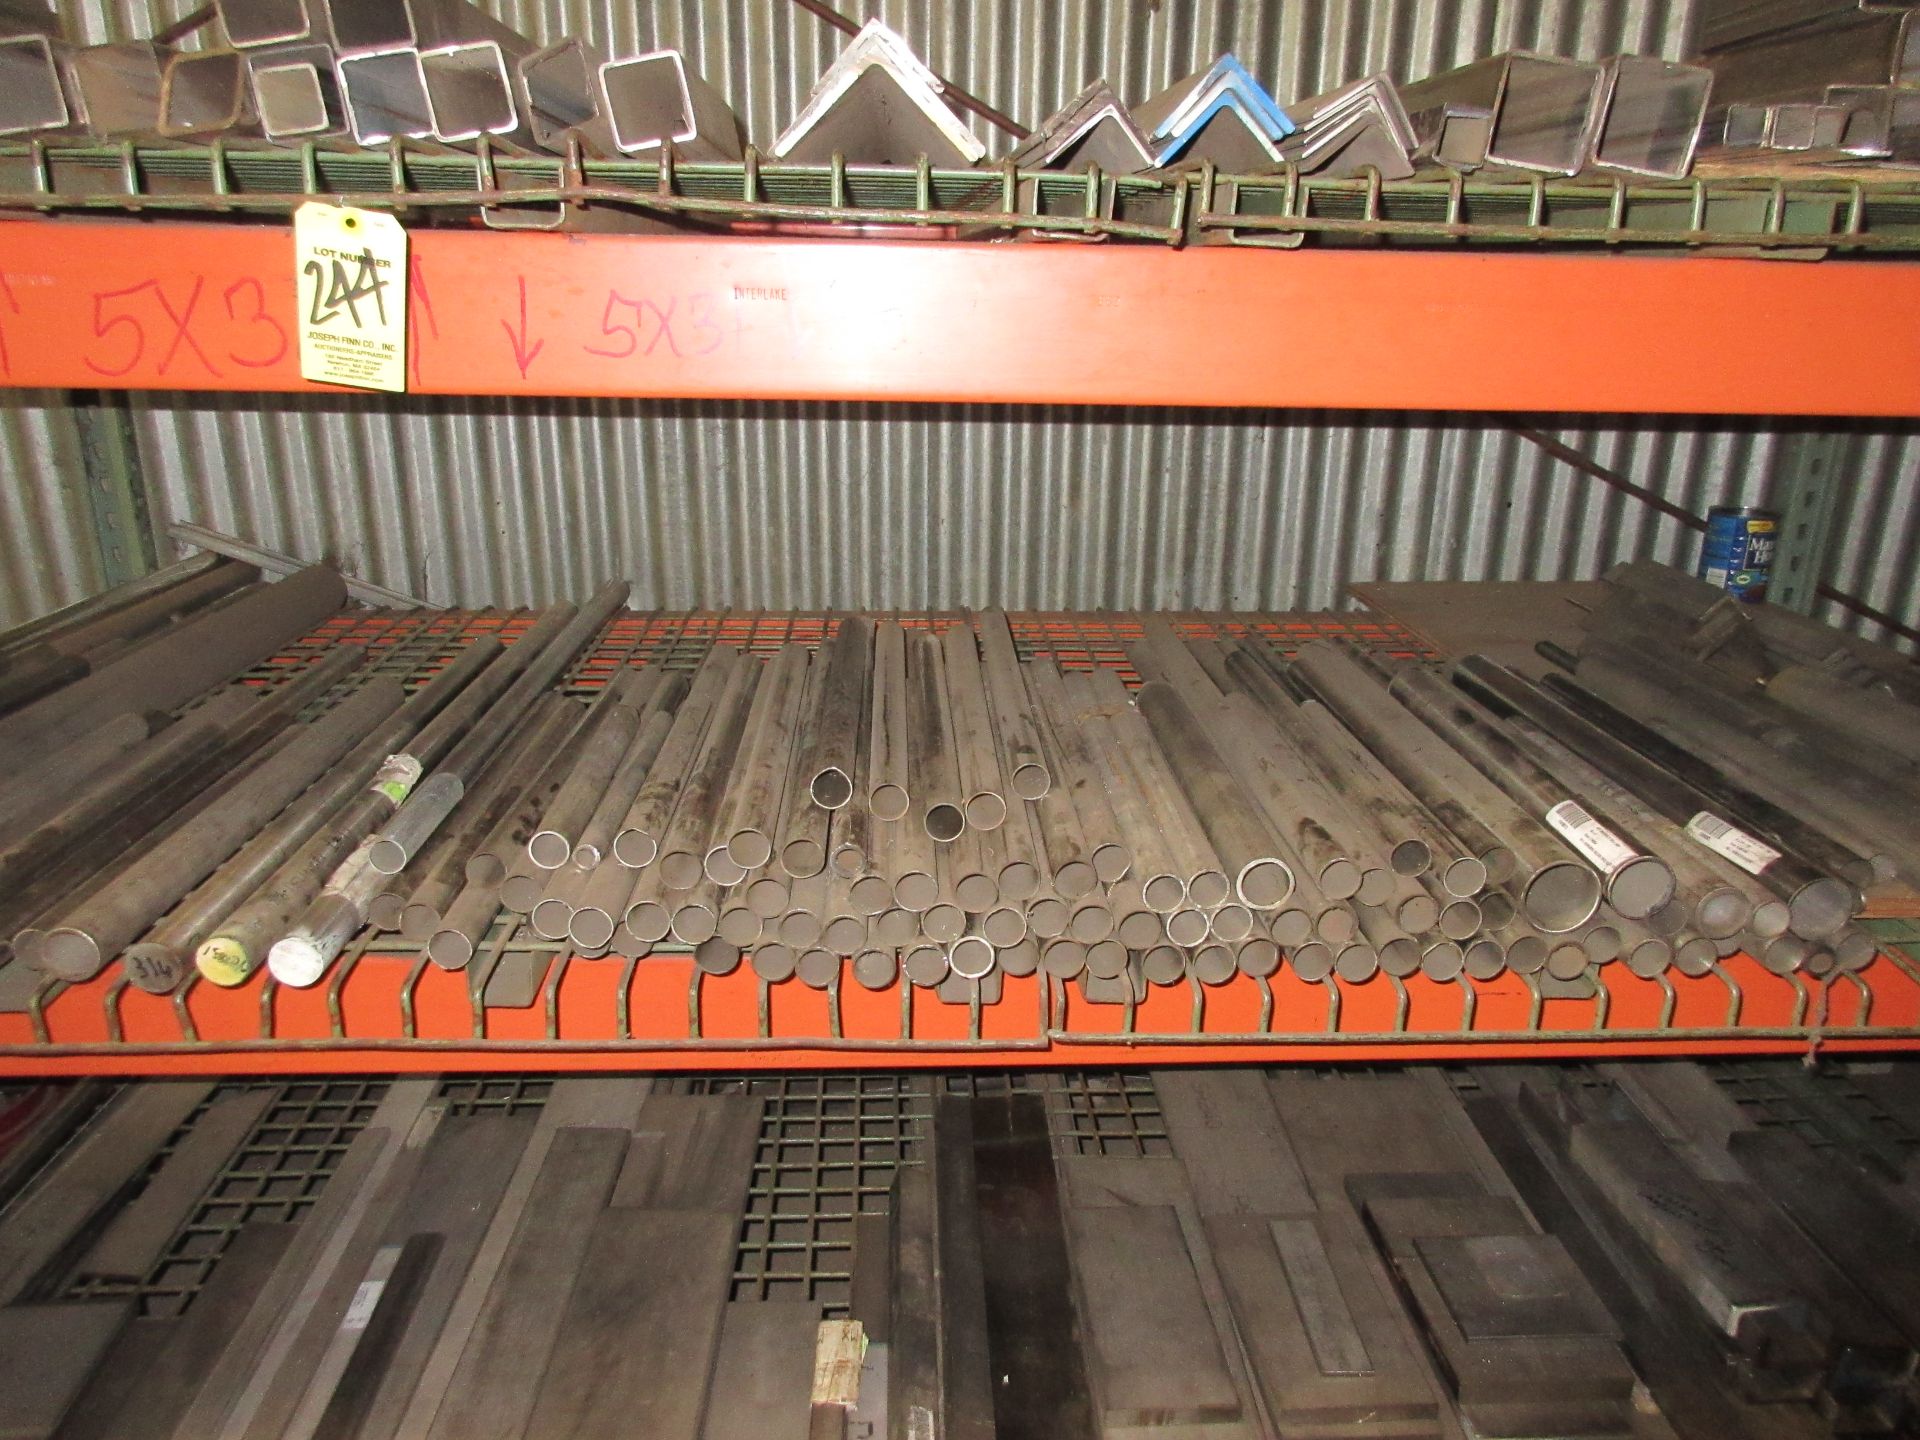 Section of Pallet Racking 8' x 42" x 64"